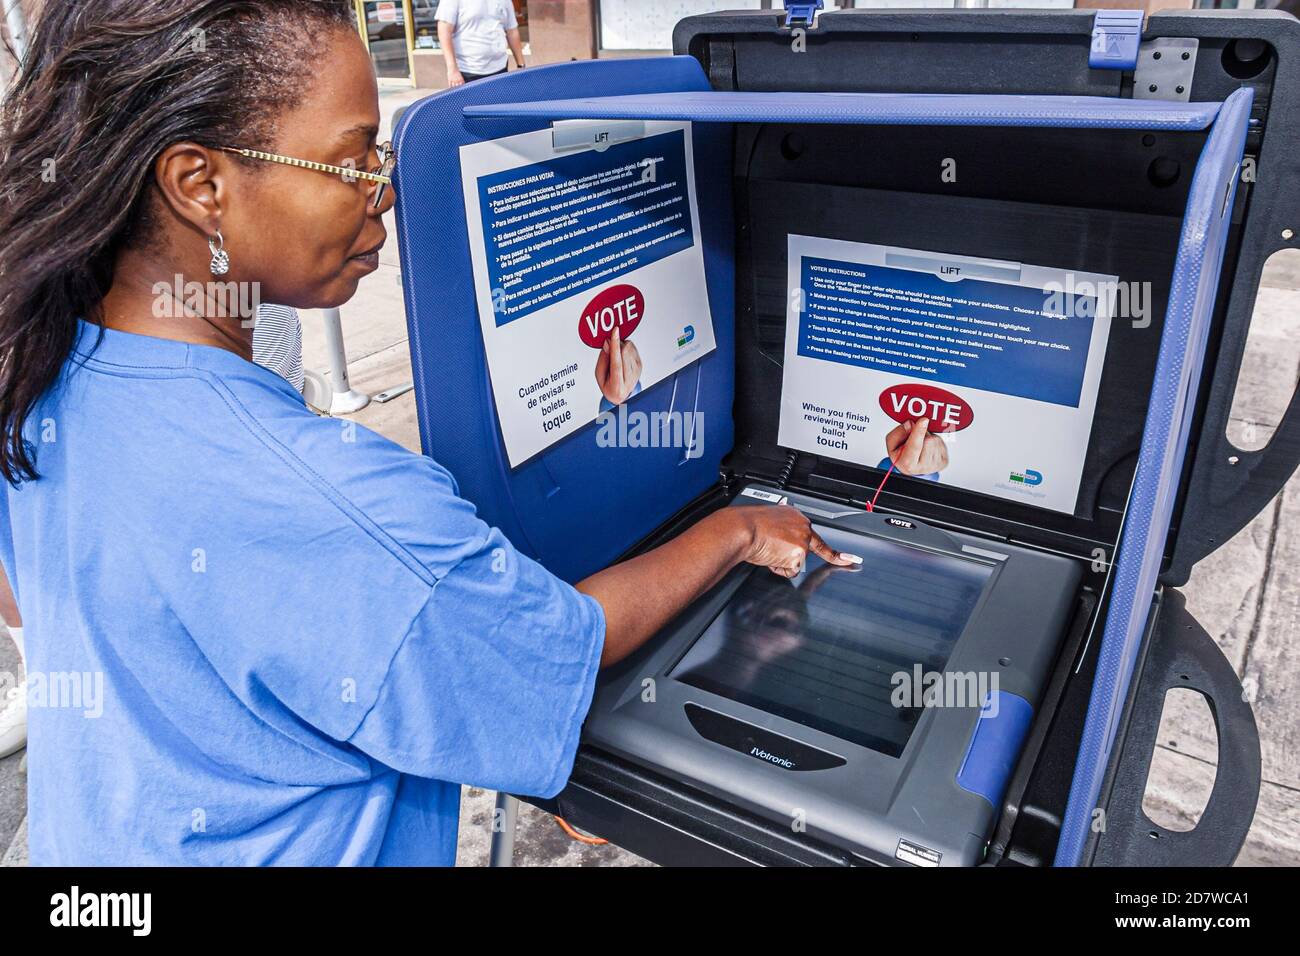 Miami Florida,Coral Gables demonstrating showing,voting booth how to vote use,touchscreen touch screen woman female Black city county employee worker Stock Photo